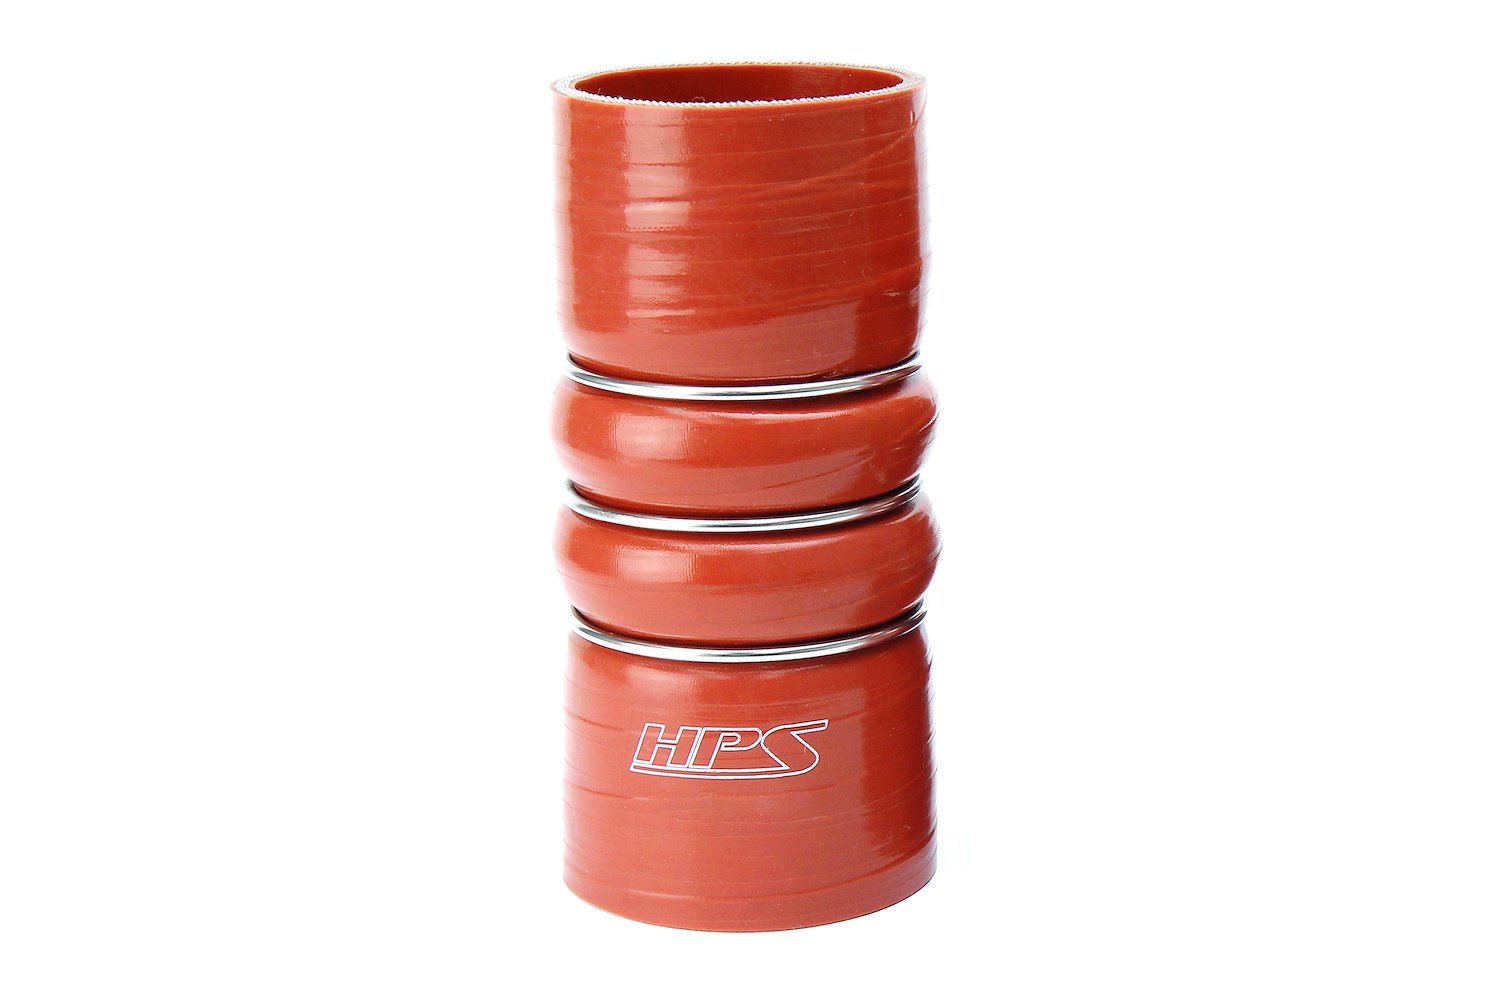 P8-CAC-700-L8-HOT Silicone CAC Hump Hose Hot, High-Temp 8-Ply Aramid Reinforced, 7 in. ID, 8 in. Long